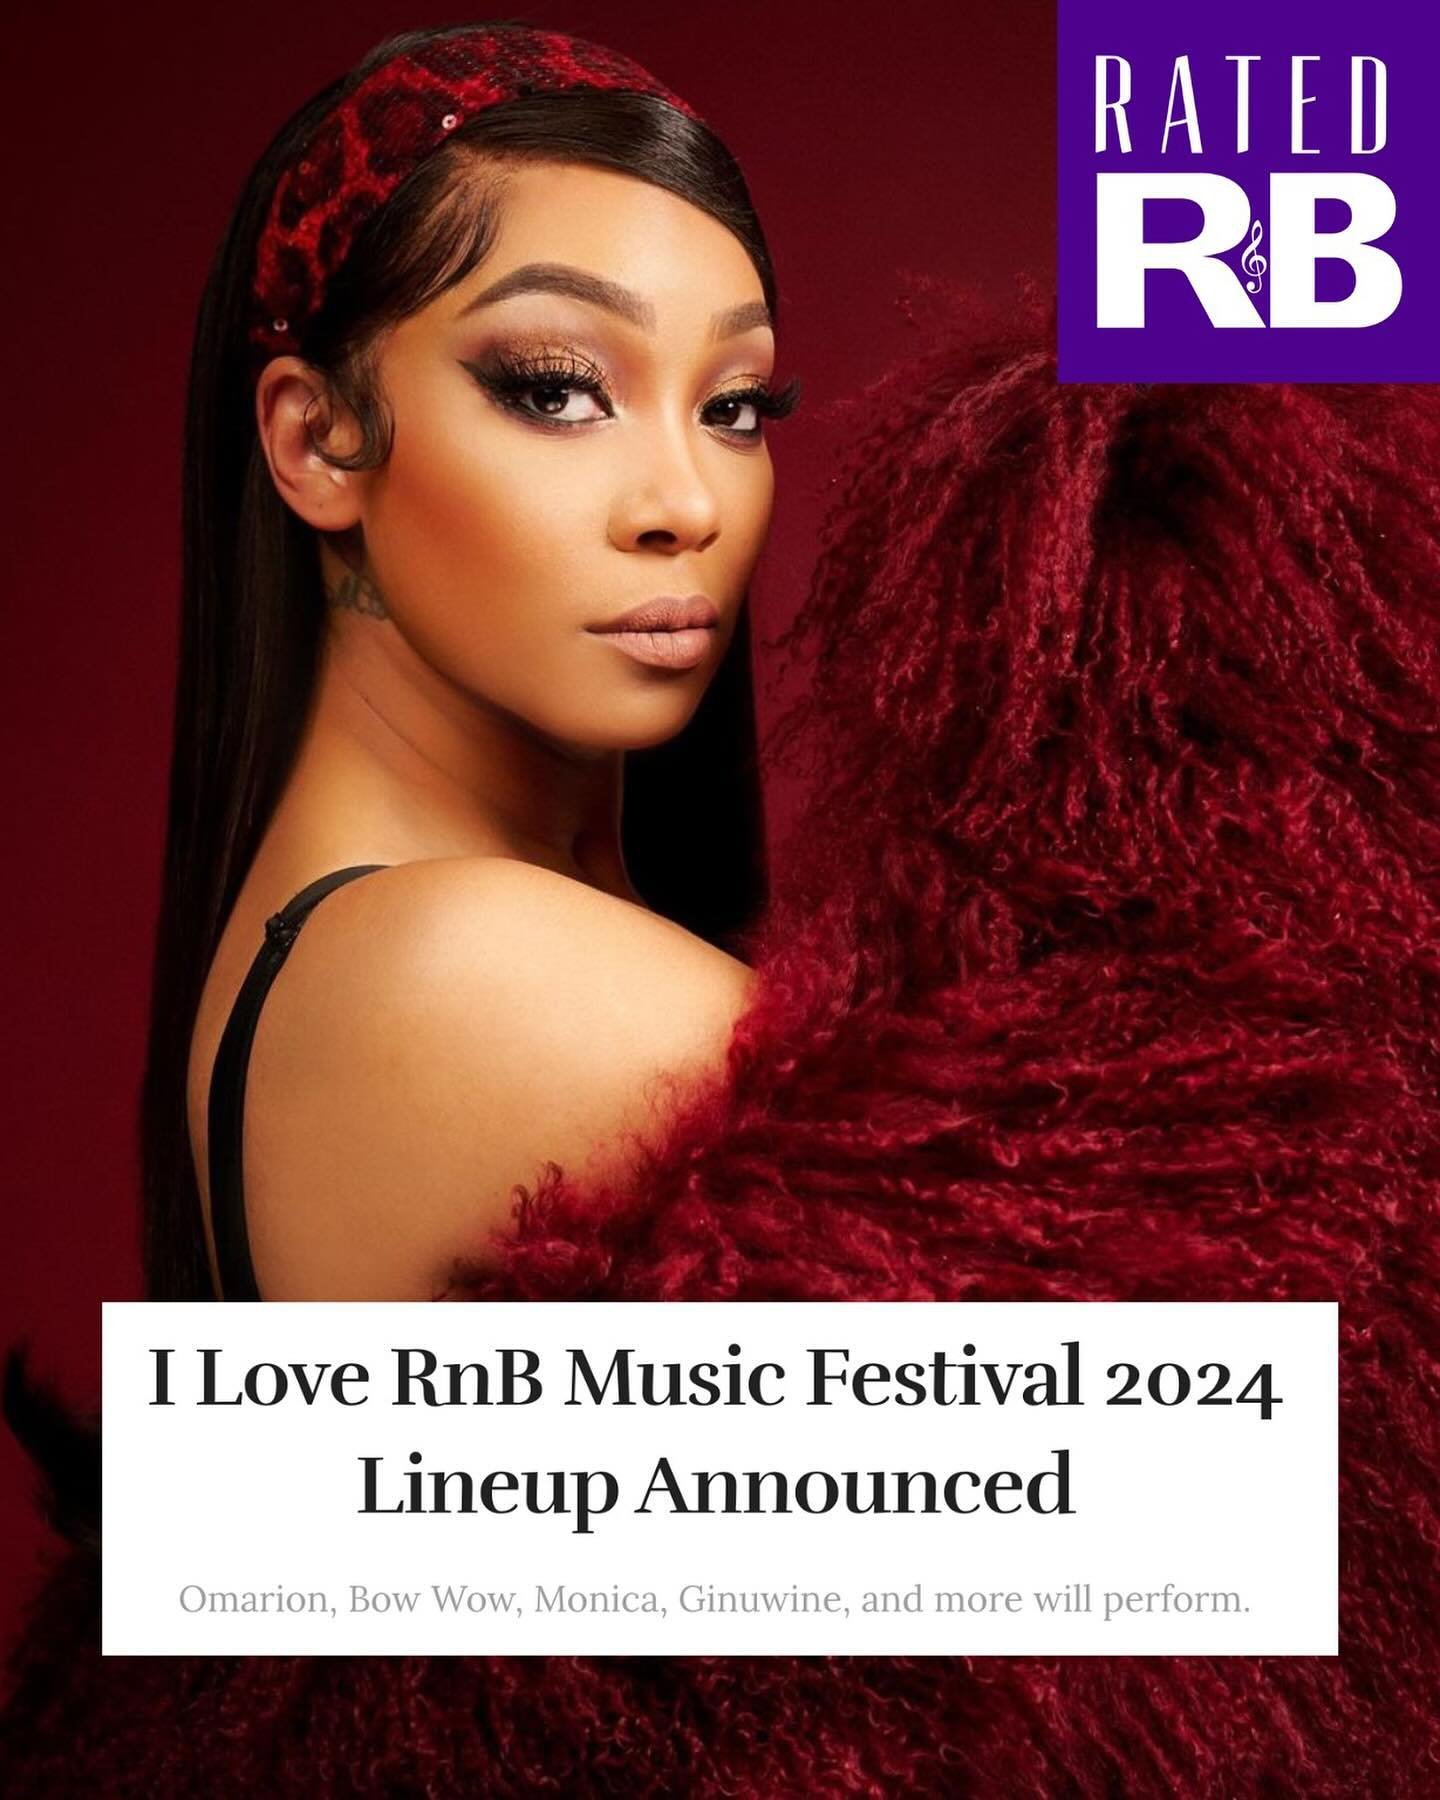 This week, it was announced that @monicadenise will play @ilovernbfestival in September! Tickets go on sale tomorrow at 10am PST. Read all about it via @ratedrnb at the link in bio💜